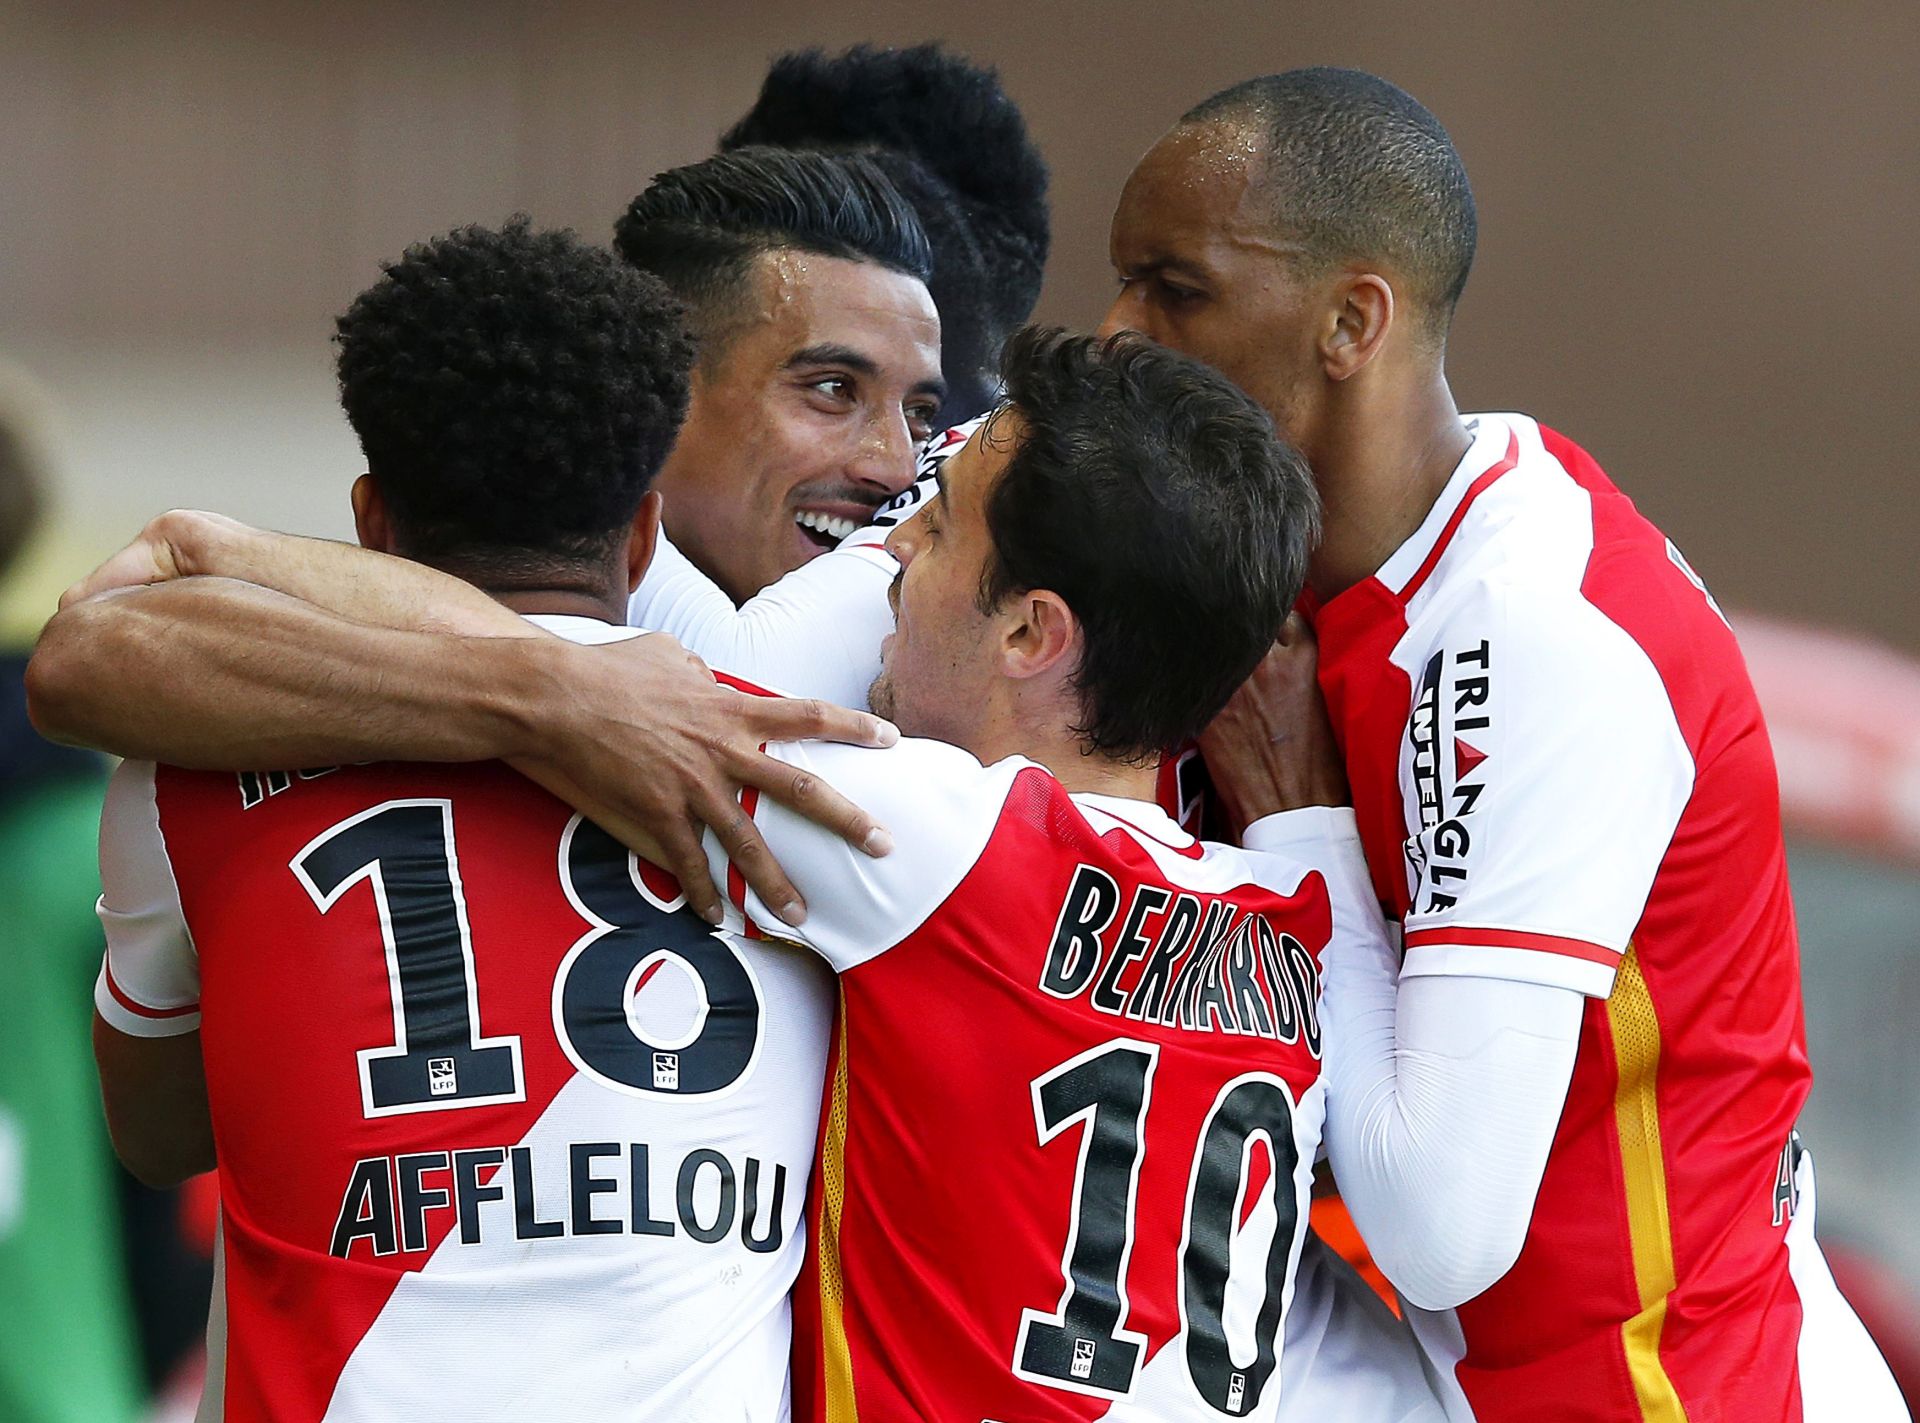 epa05284653 Monaco's Nabil Dirar (2-L) celebrates with his teammates after scoring the 2-0 lead during the French Ligue 1 soccer match between AS Monaco and EA Guingamp at Stade Louis II in Monaco, 30 April 2016.  EPA/SEBASTIEN NOGIER